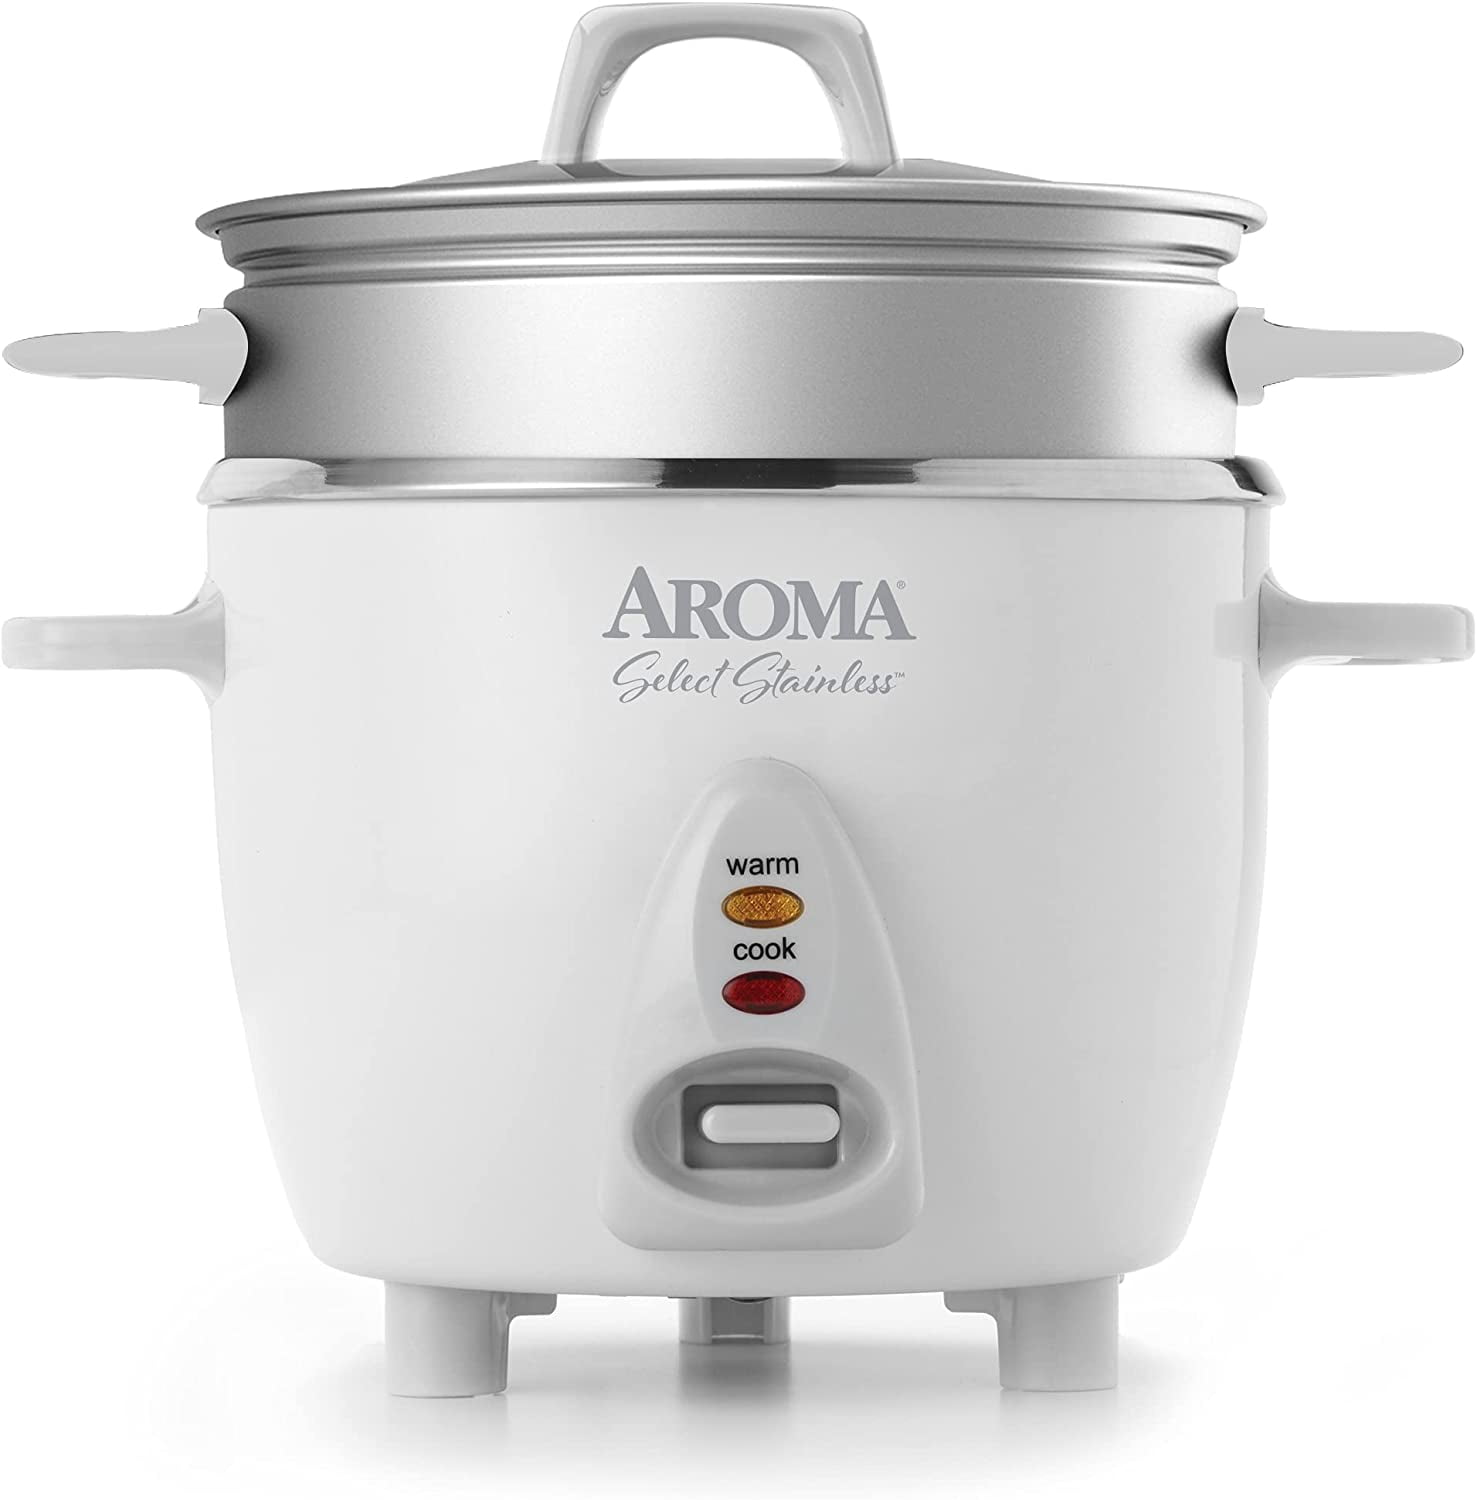 AROMA 32-Cup White Rice Cooker ARC-7216NG - The Home Depot